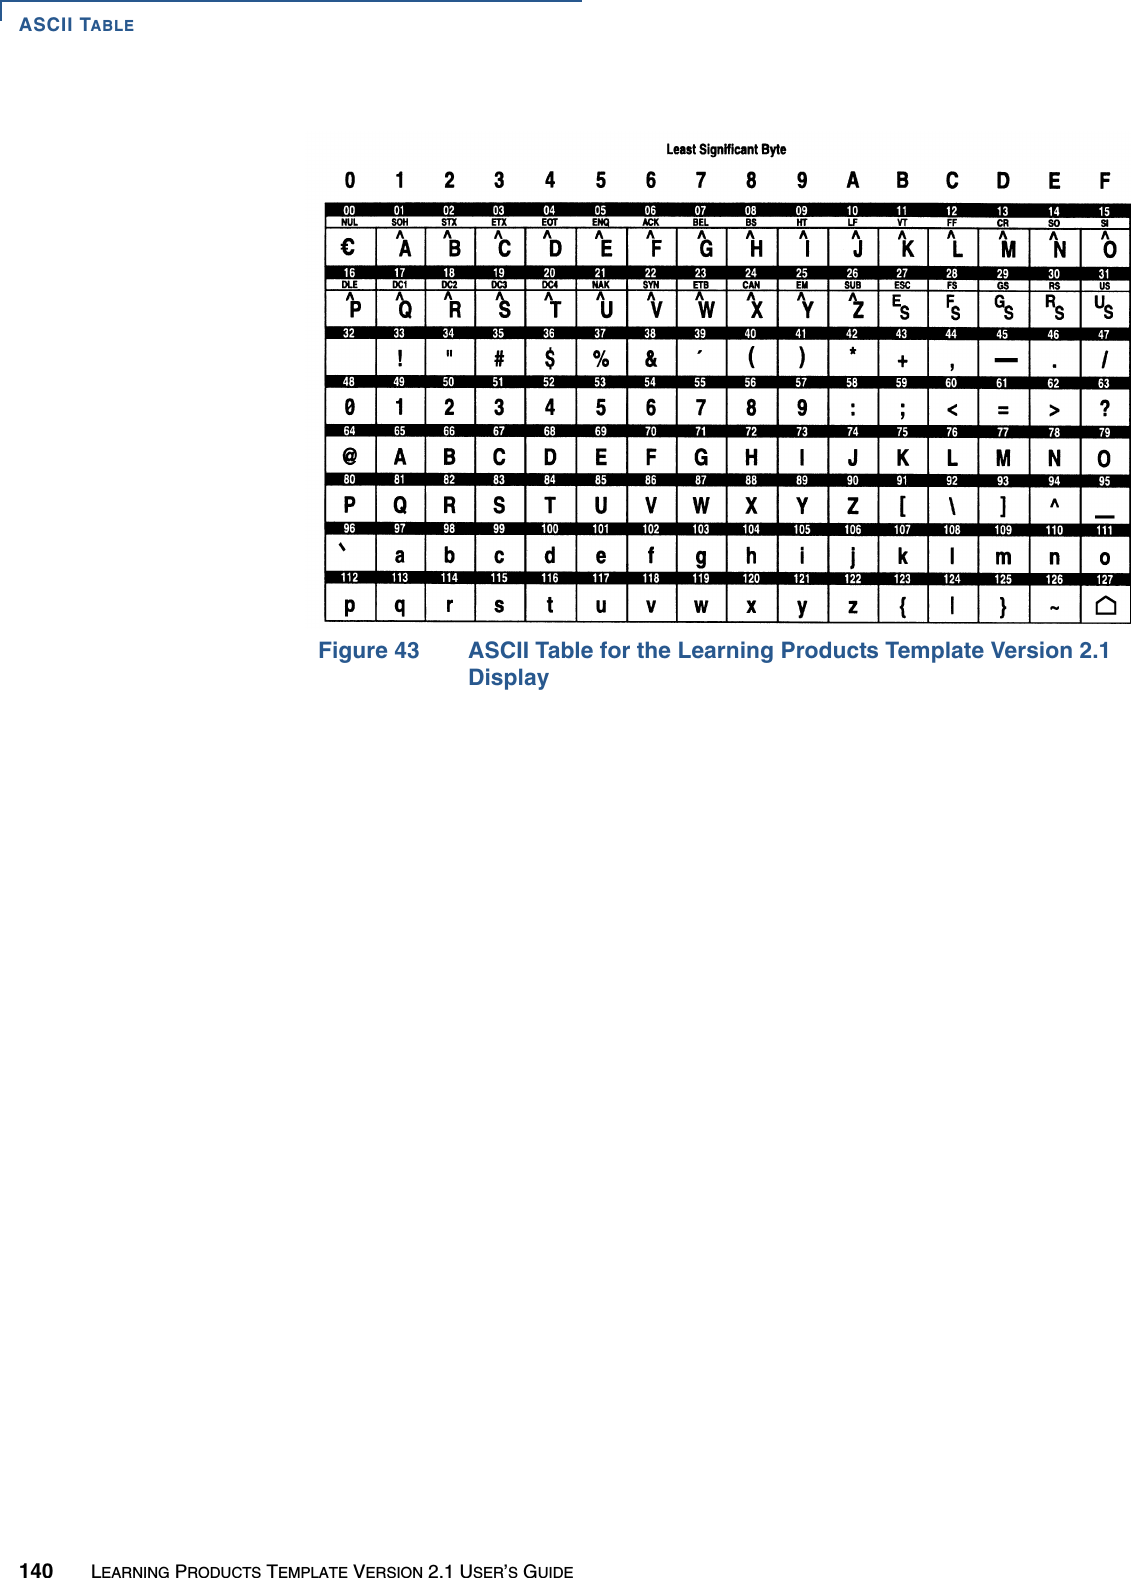 ASCII TABLE140 LEARNING PRODUCTS TEMPLATE VERSION 2.1 USER’S GUIDEFigure 43 ASCII Table for the Learning Products Template Version 2.1 Display